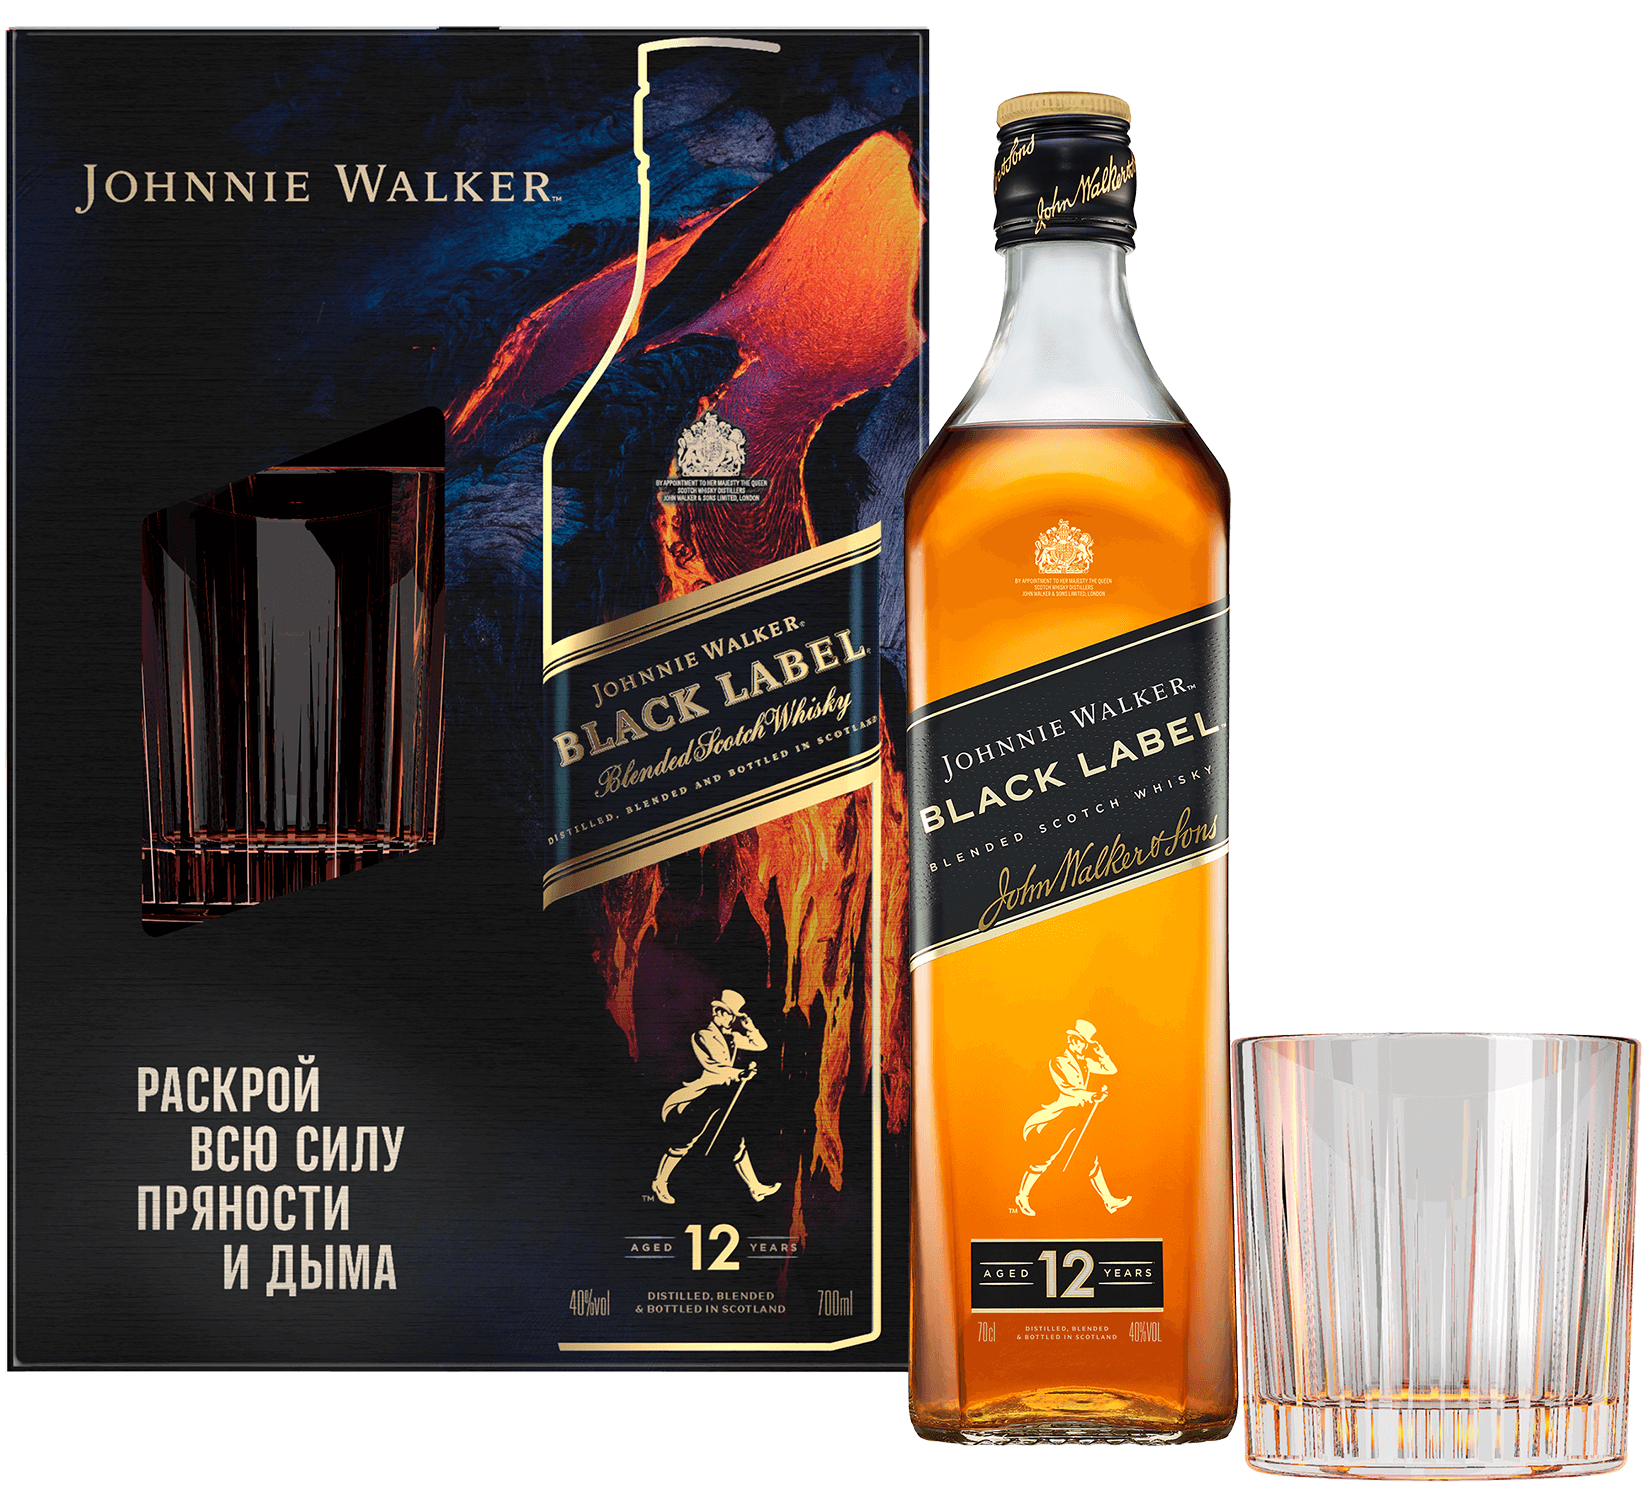 Johnnie Walker Black Label Blended Scotch Whisky (gift box with a glass) johnnie walker red label blended scotch whisky gift box with 1 glass